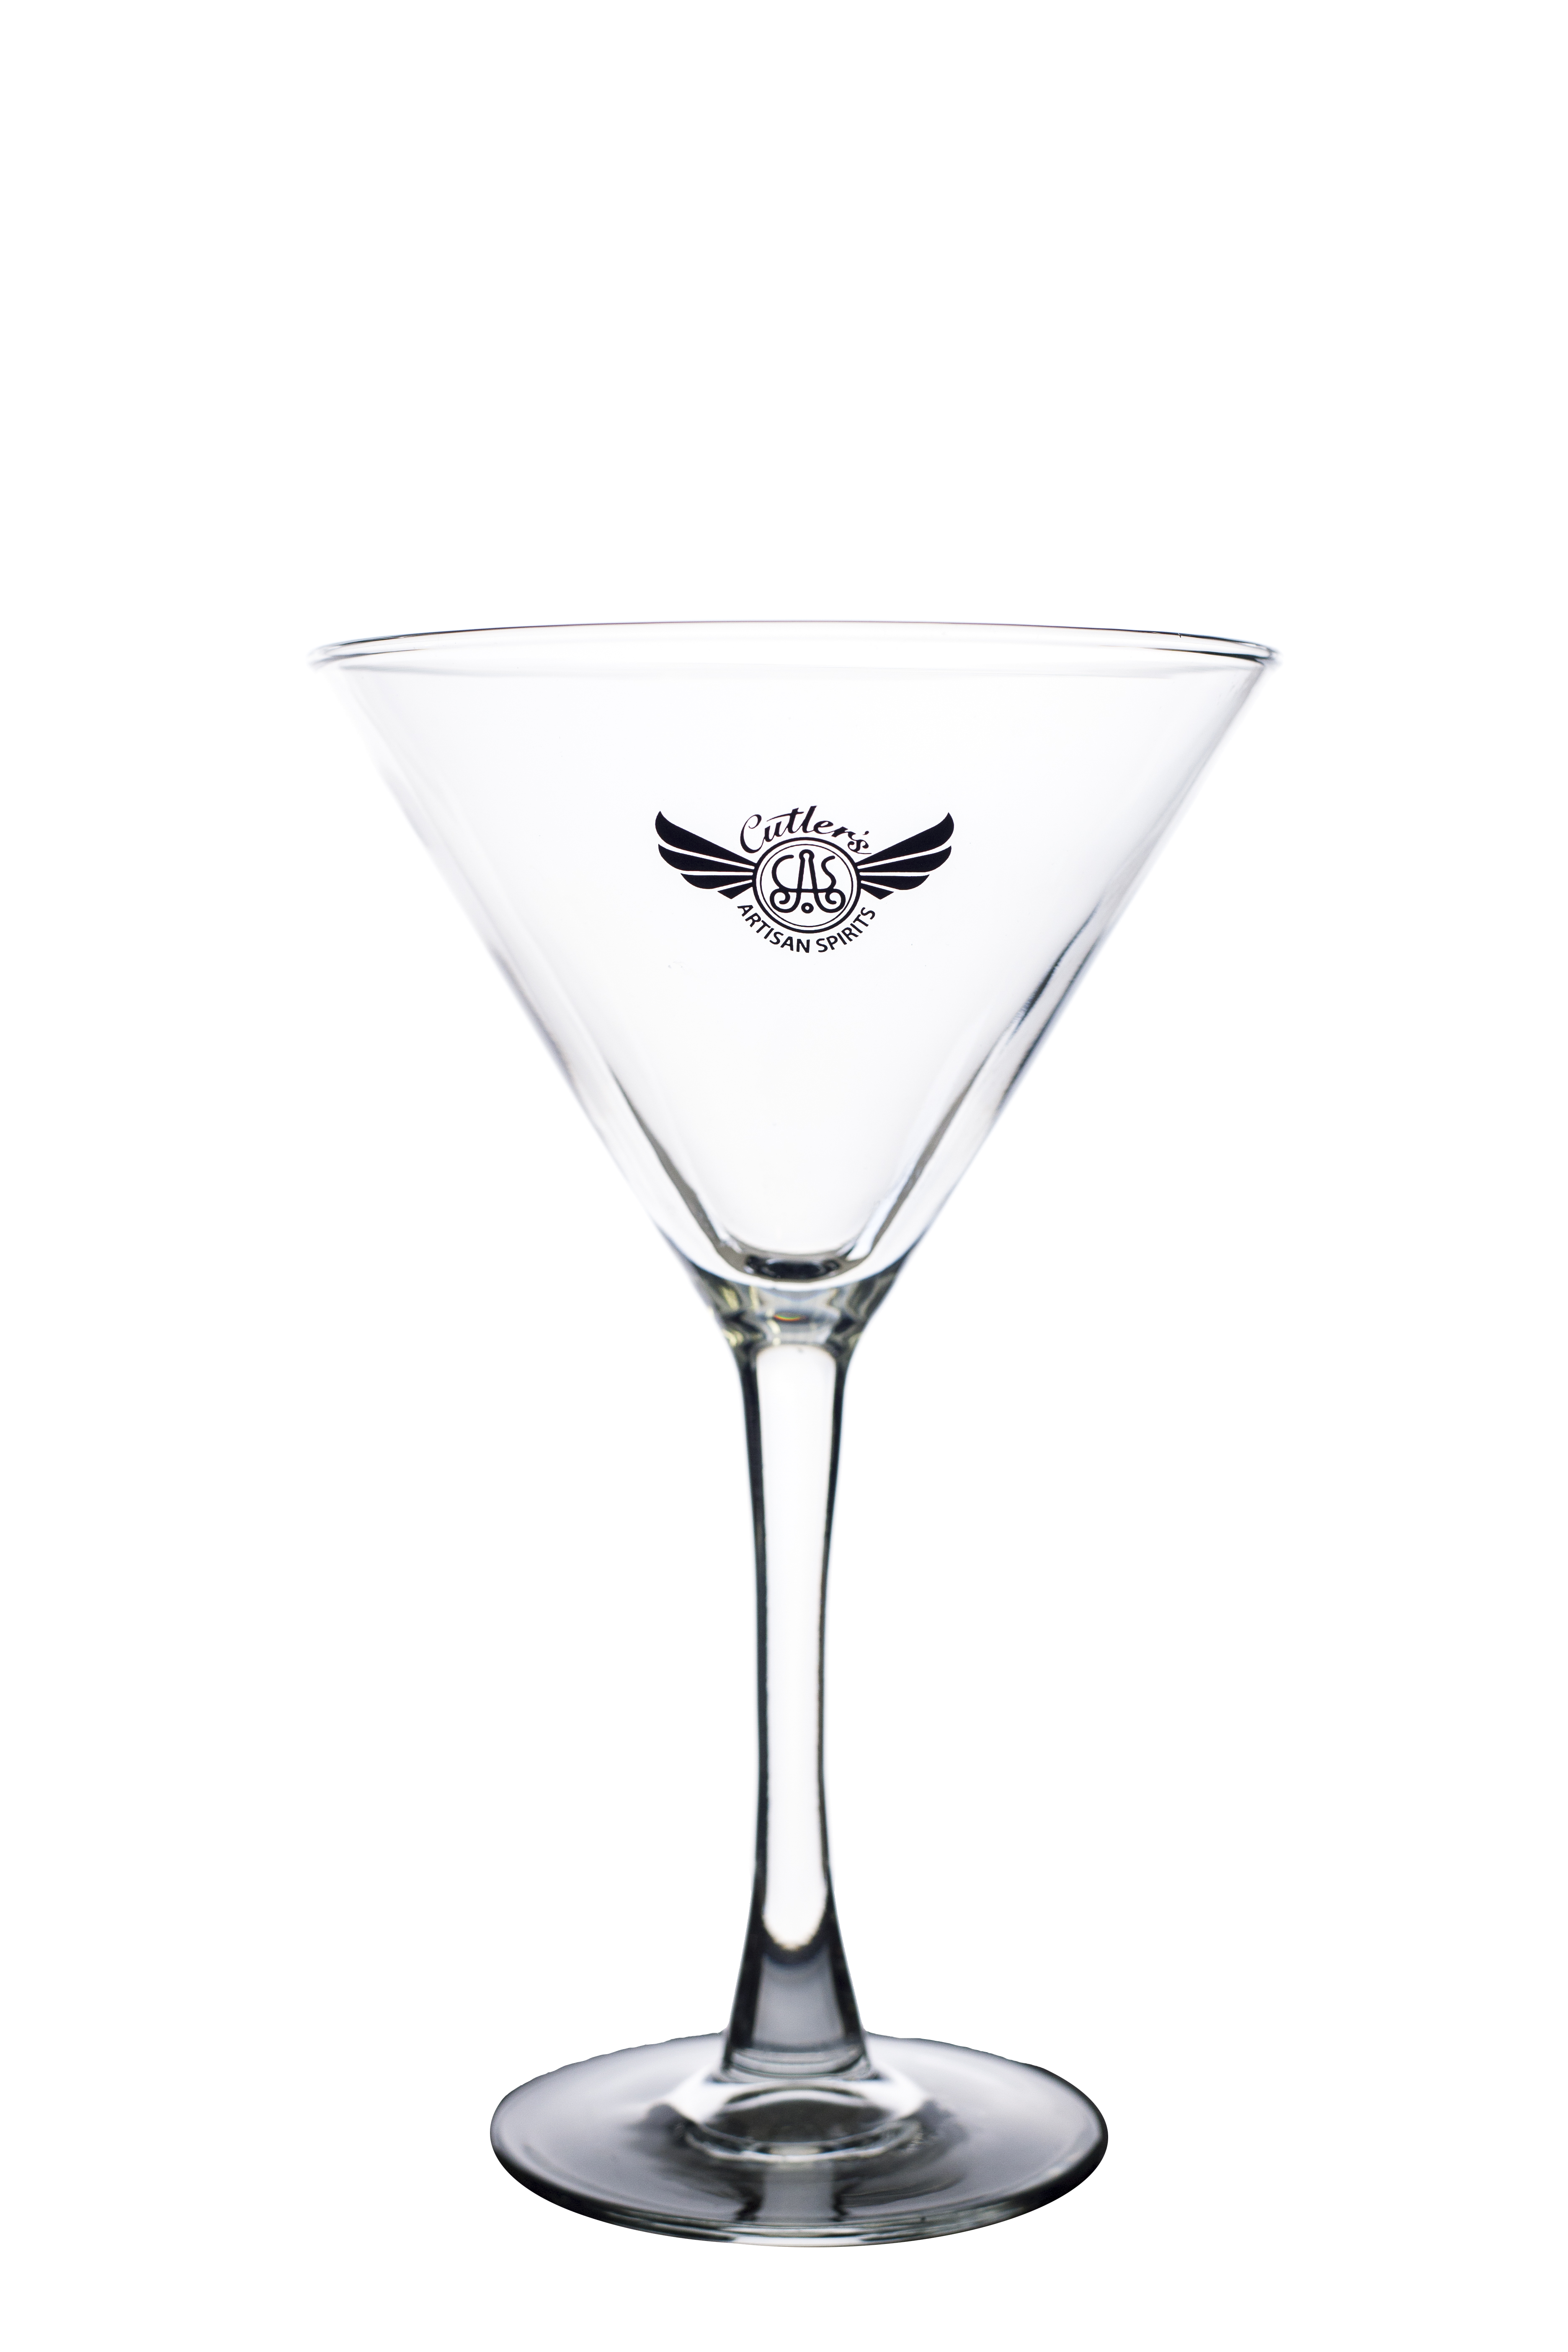 cocktail clipart whisky glass